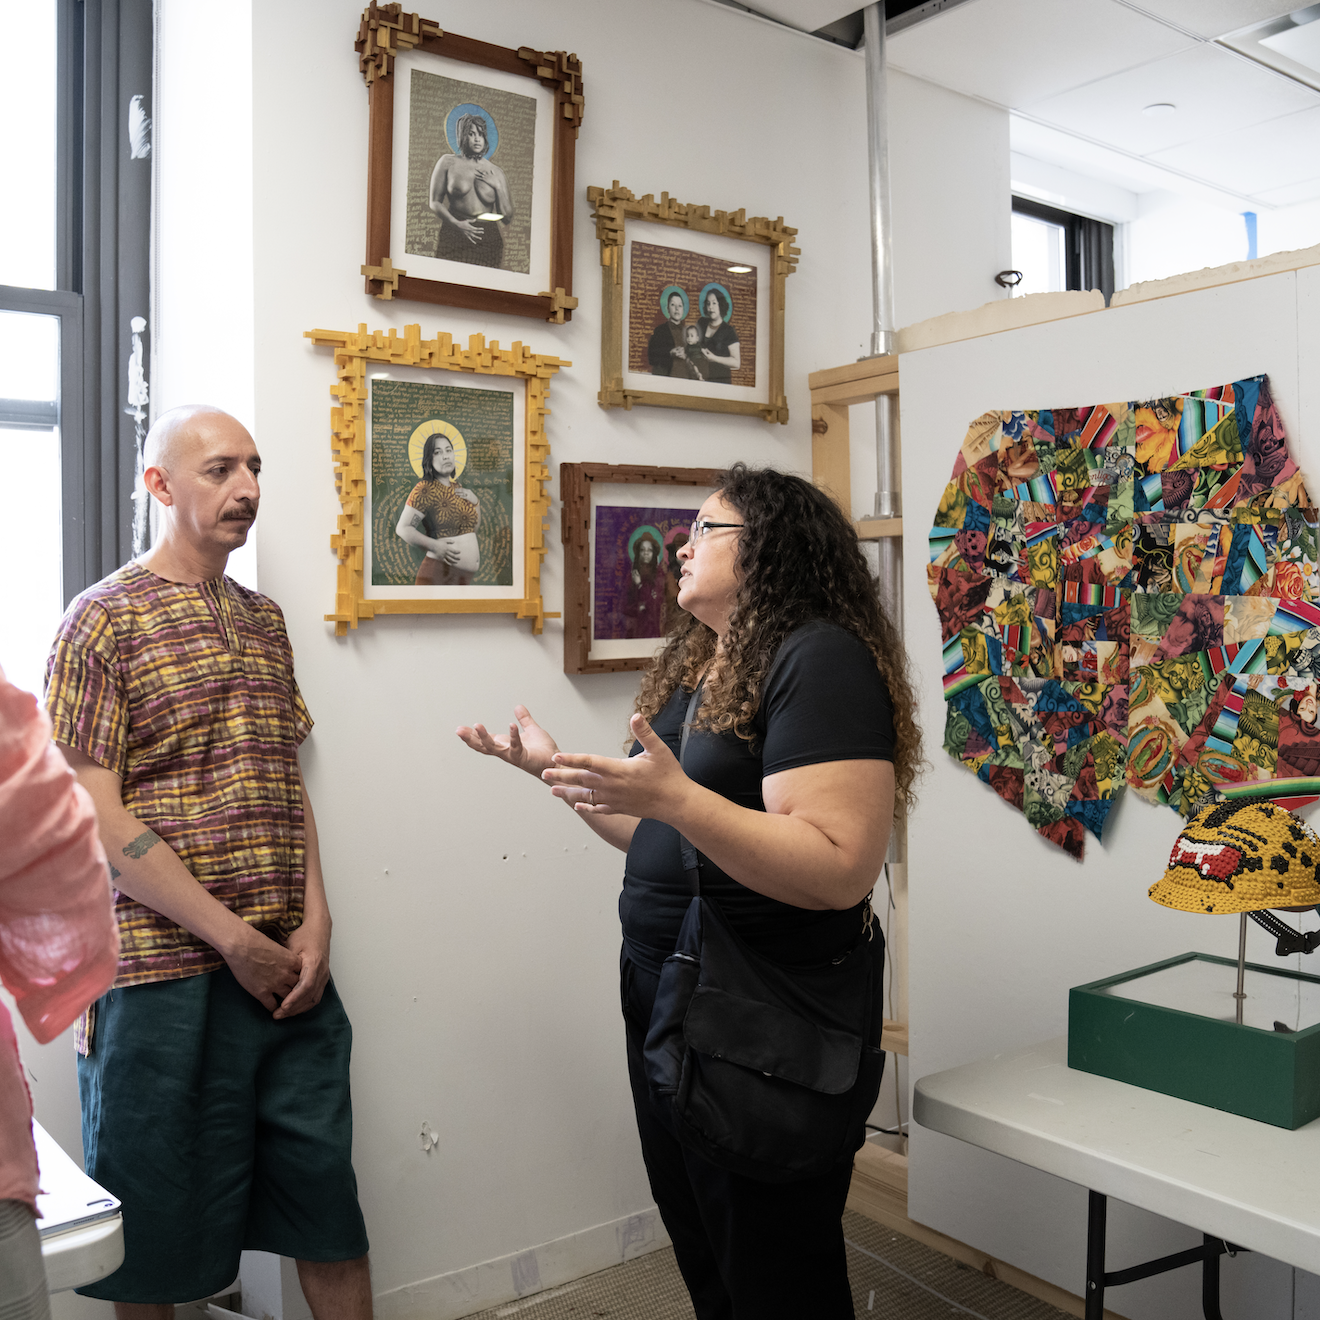 Three individuals standing in an artist studio having a conversation. Behind the individuals are two corner studio walls filled with colorful artwork including framed photo portraits, textile pieces, jewelry and sculptures of construction helmets, displayed on a table.